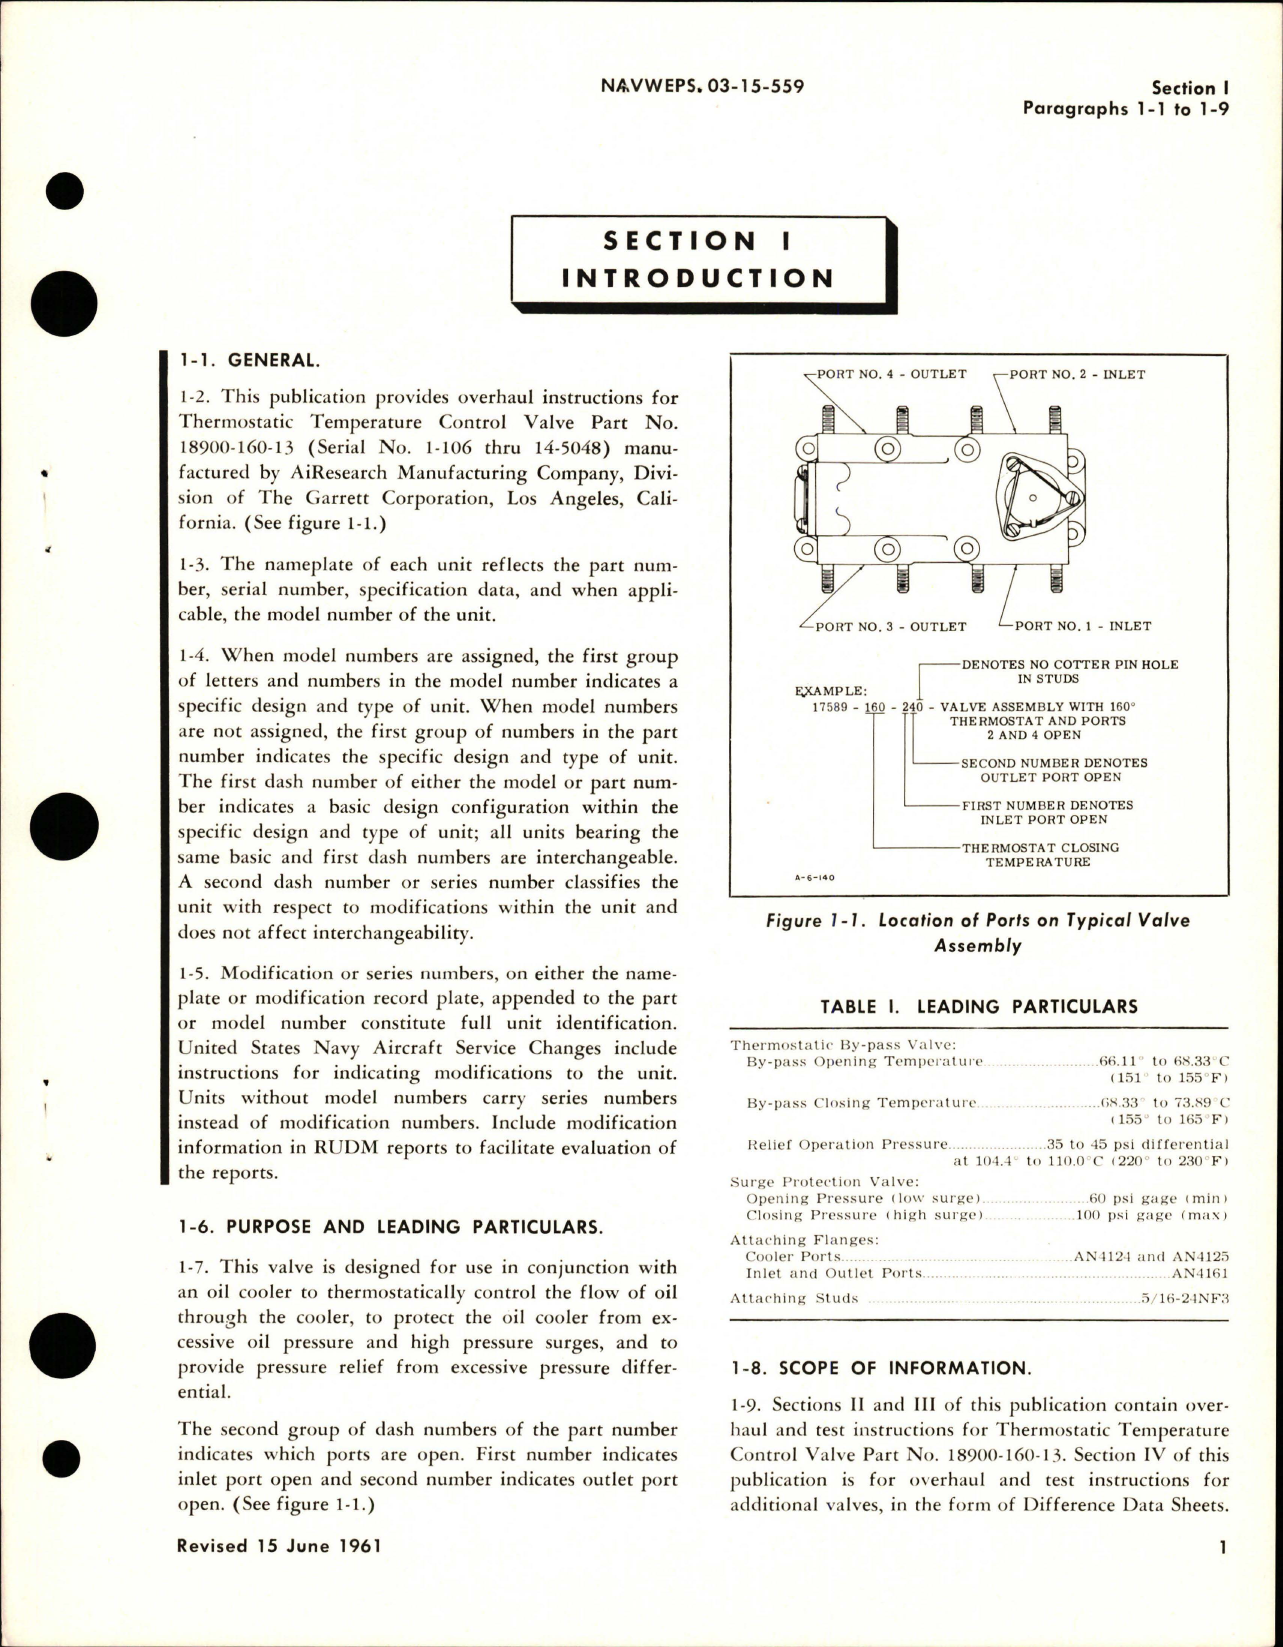 Sample page 5 from AirCorps Library document: Overhaul Instructions for Thermostatic Temperature Control Valves